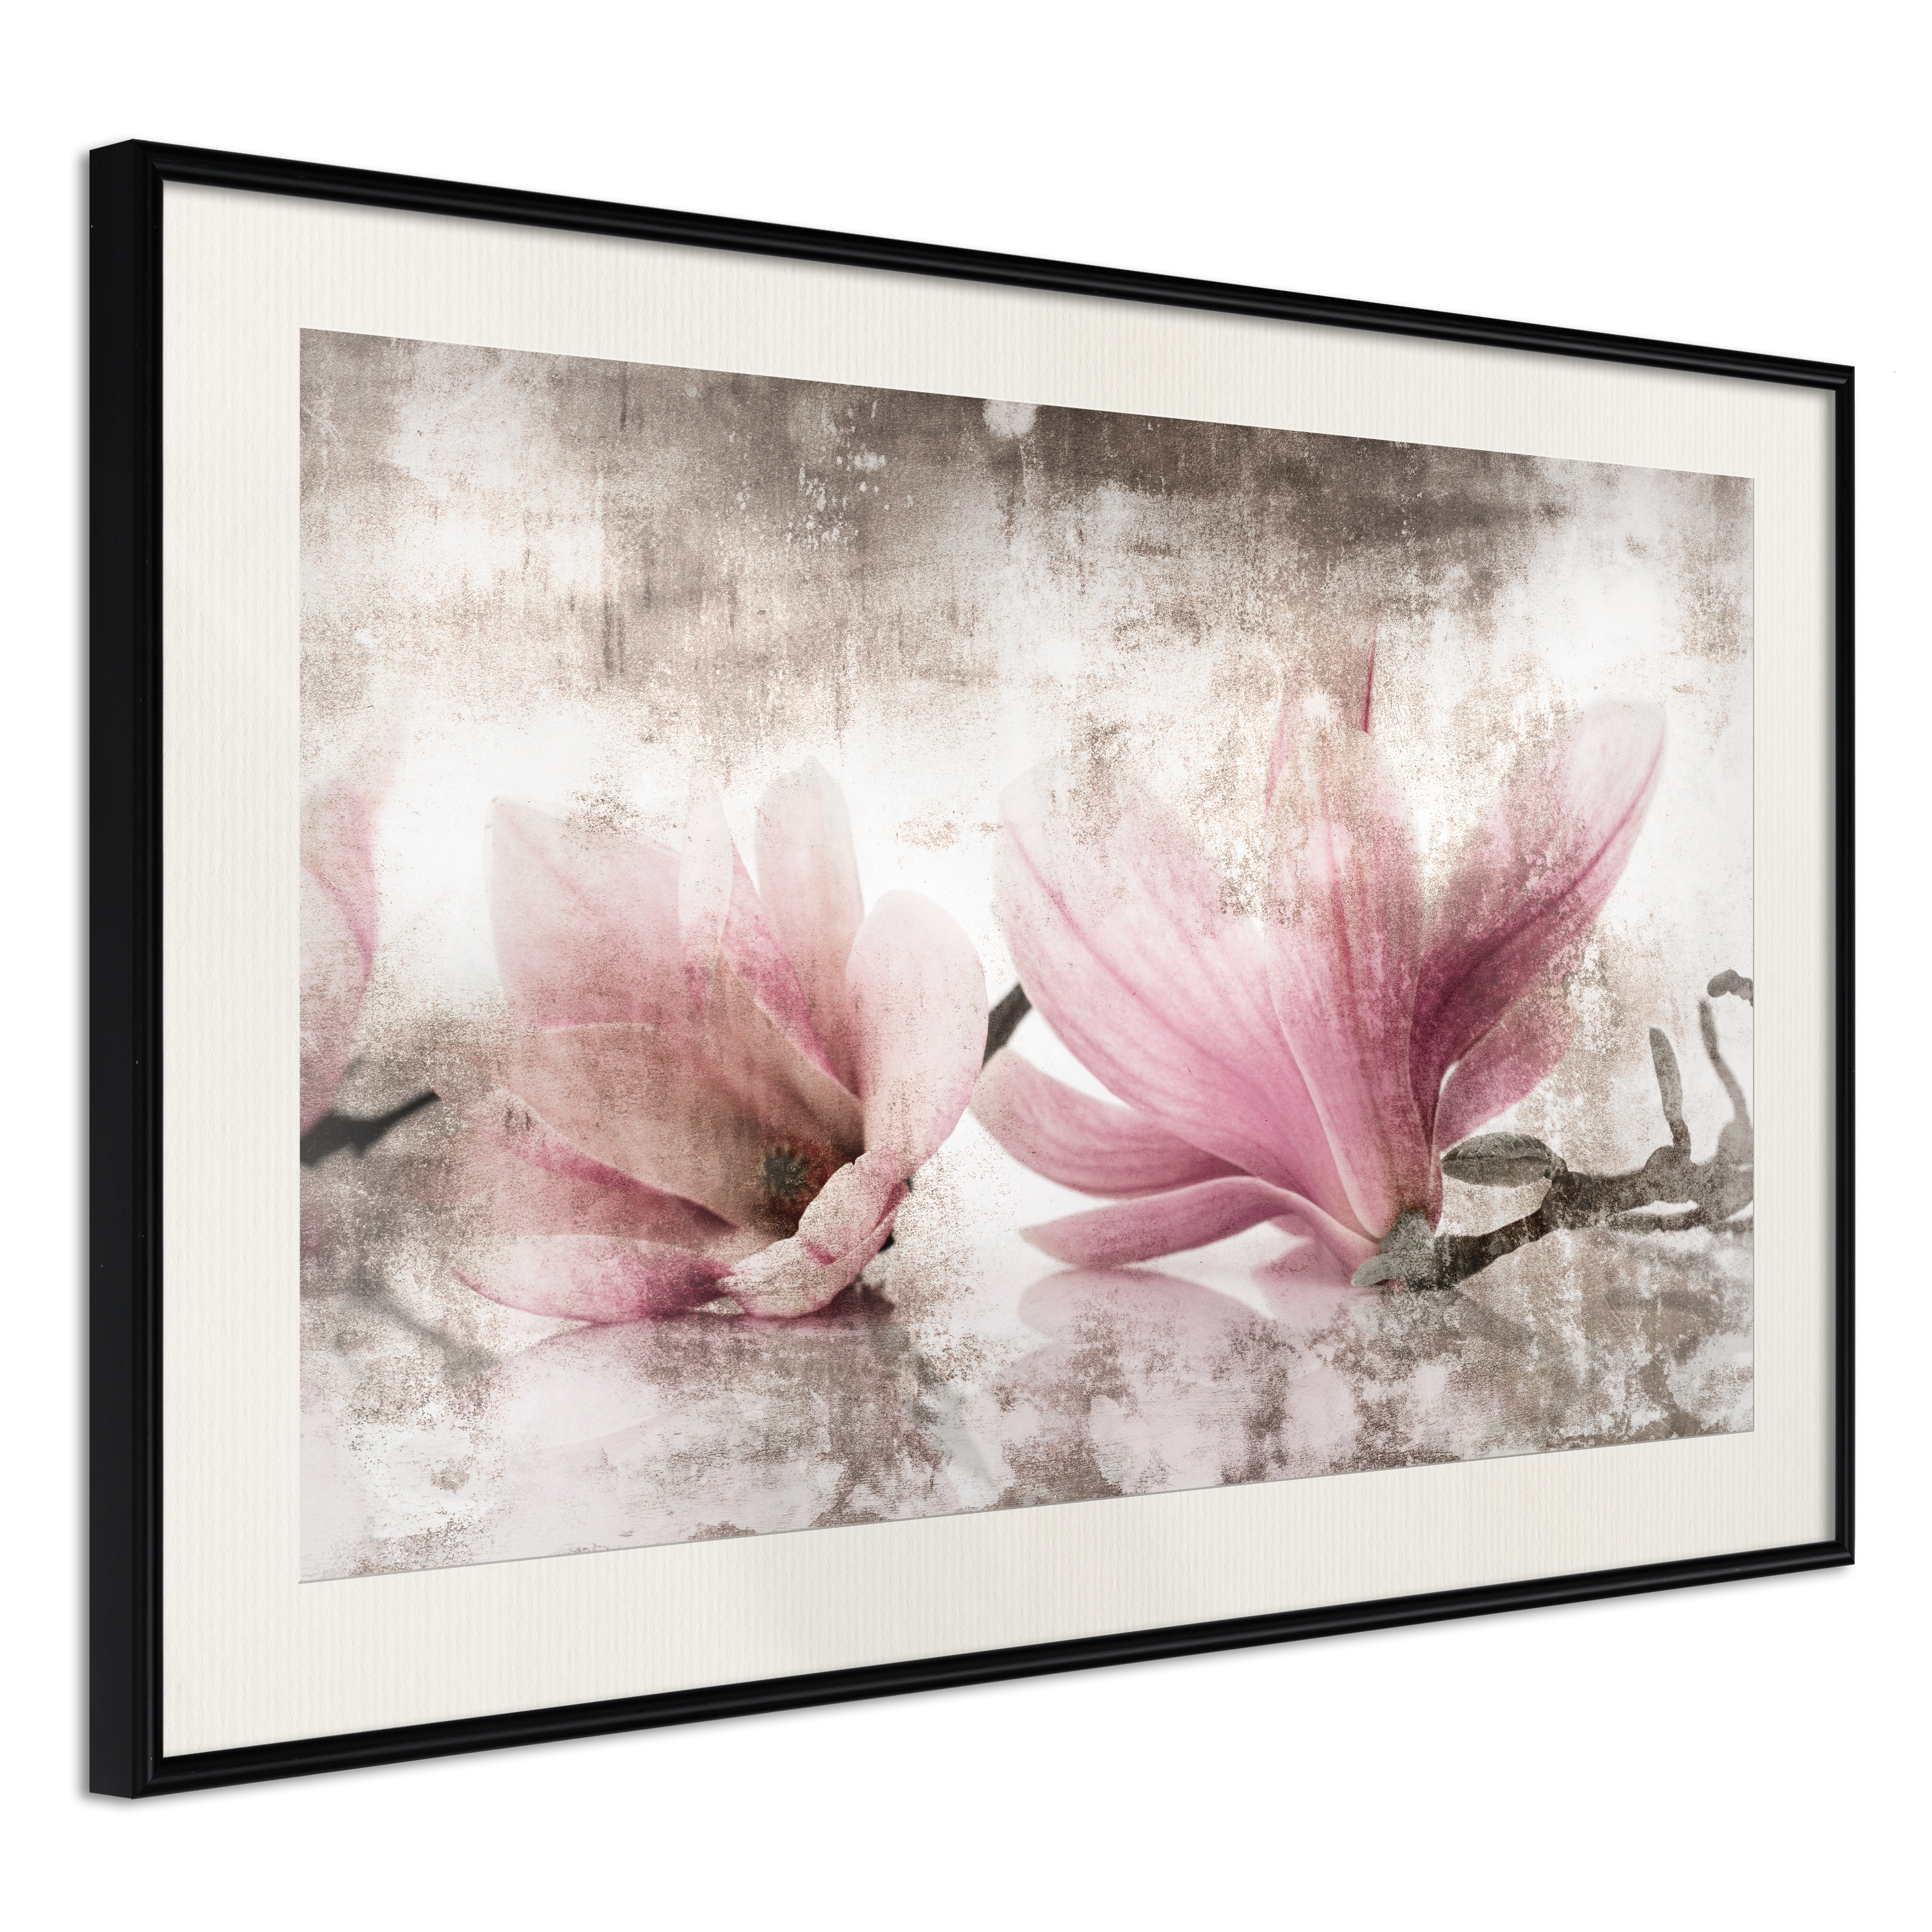 Poster - Picked Magnolias - 45x30